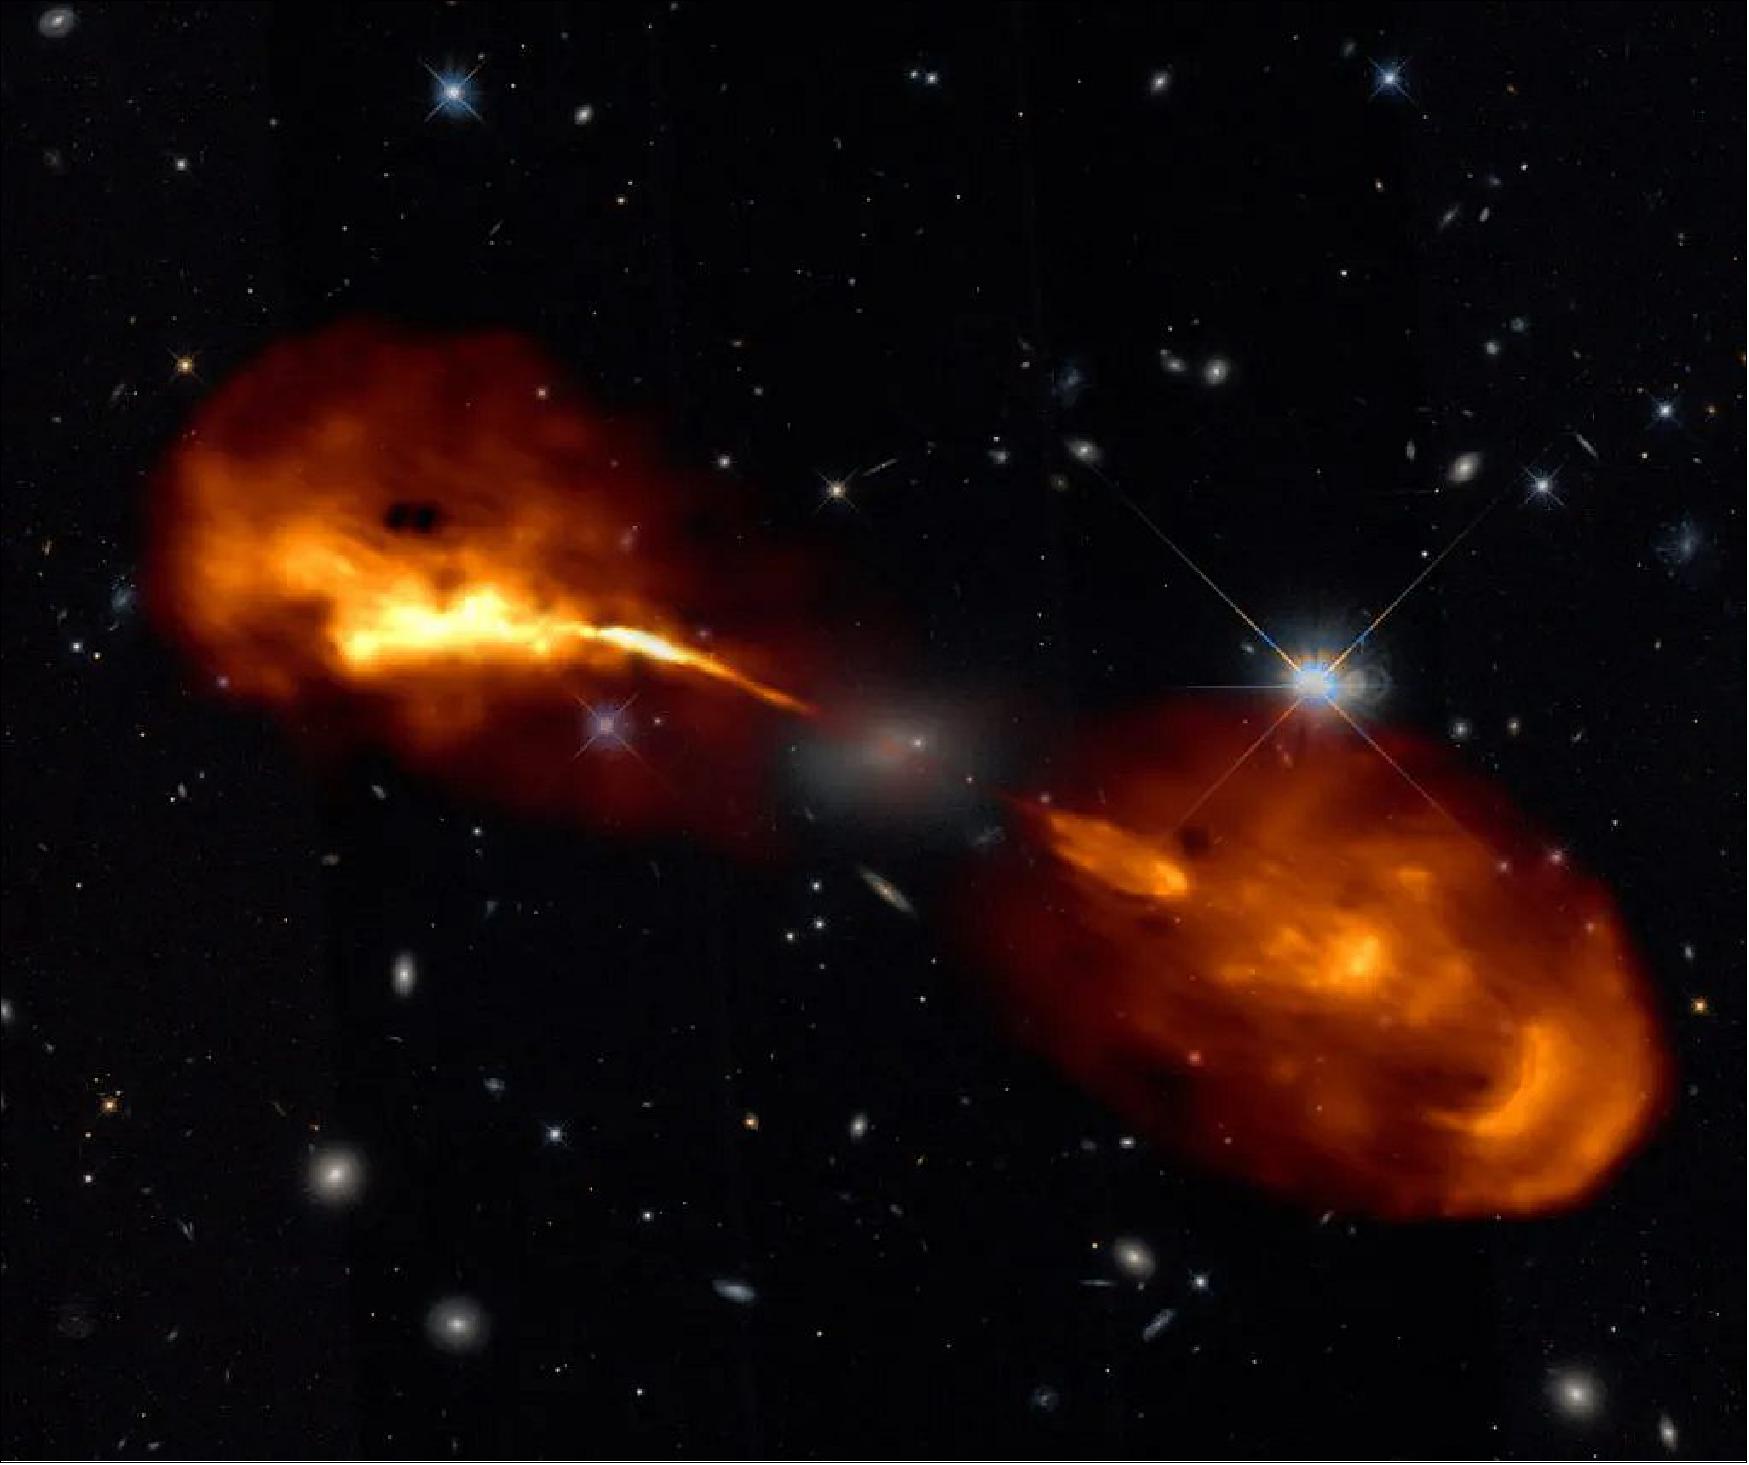 Figure 10: Hercules A is powered by a supermassive black hole located at its centre, which feeds on the surrounding gas and channels some of this gas into extremely fast jets. Our new high-resolutions observations taken with LOFAR have revealed that this jet grows stronger and weaker every few hundred thousand years. This variability produces the beautiful structures seen in the giant lobes, each of which is about as large as the Milky Way galaxy (image credit: R. Timmerman; LOFAR & Hubble Space Telescope)